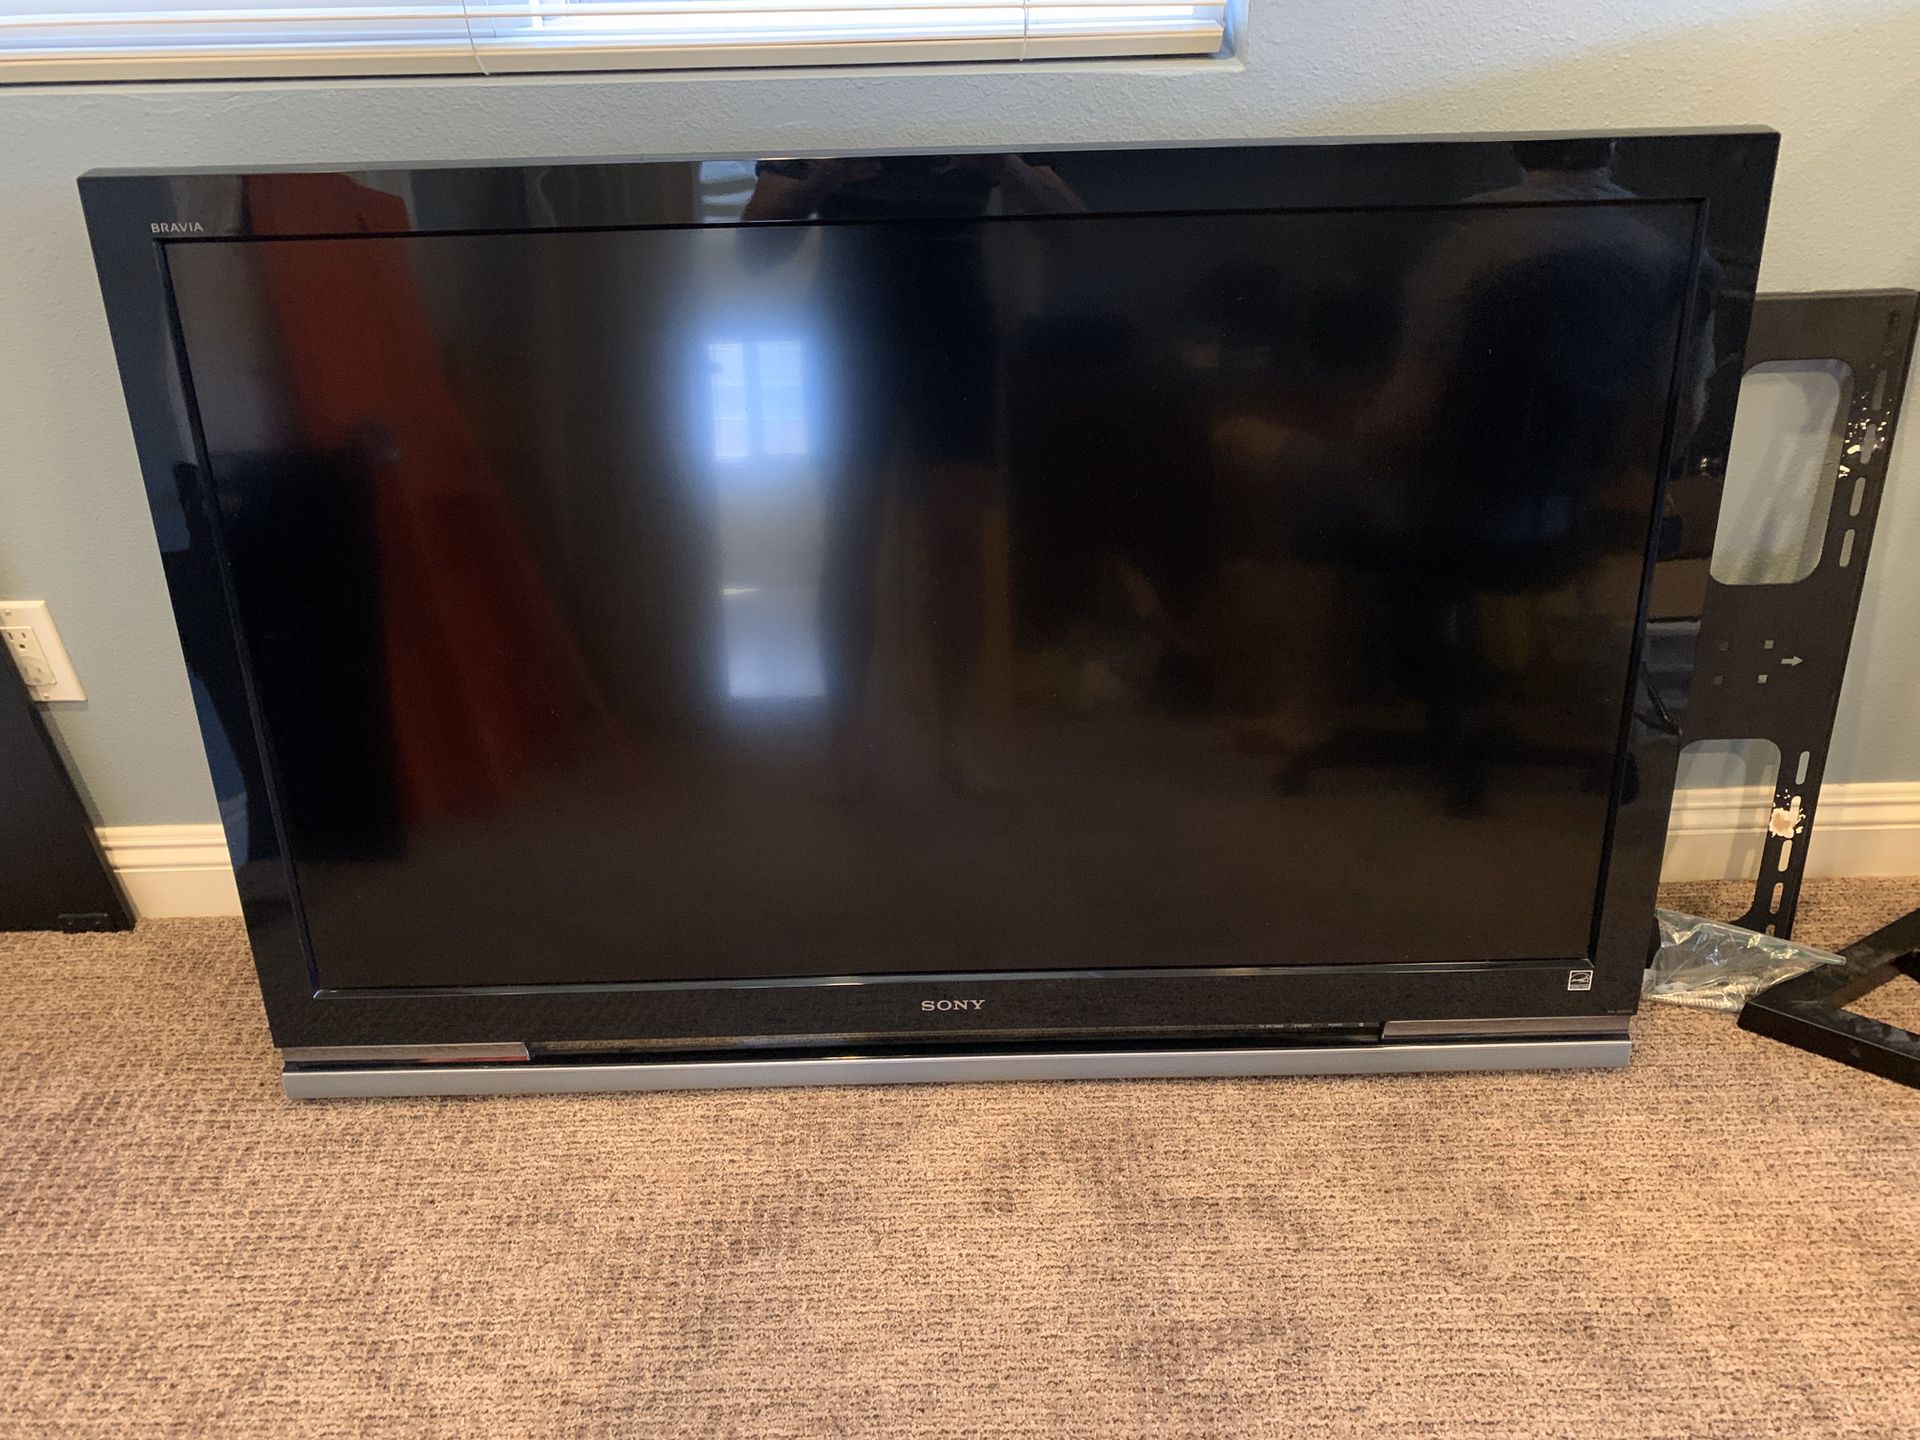 Sony Bravia 52” LCD TV, Includes Wall Mount!